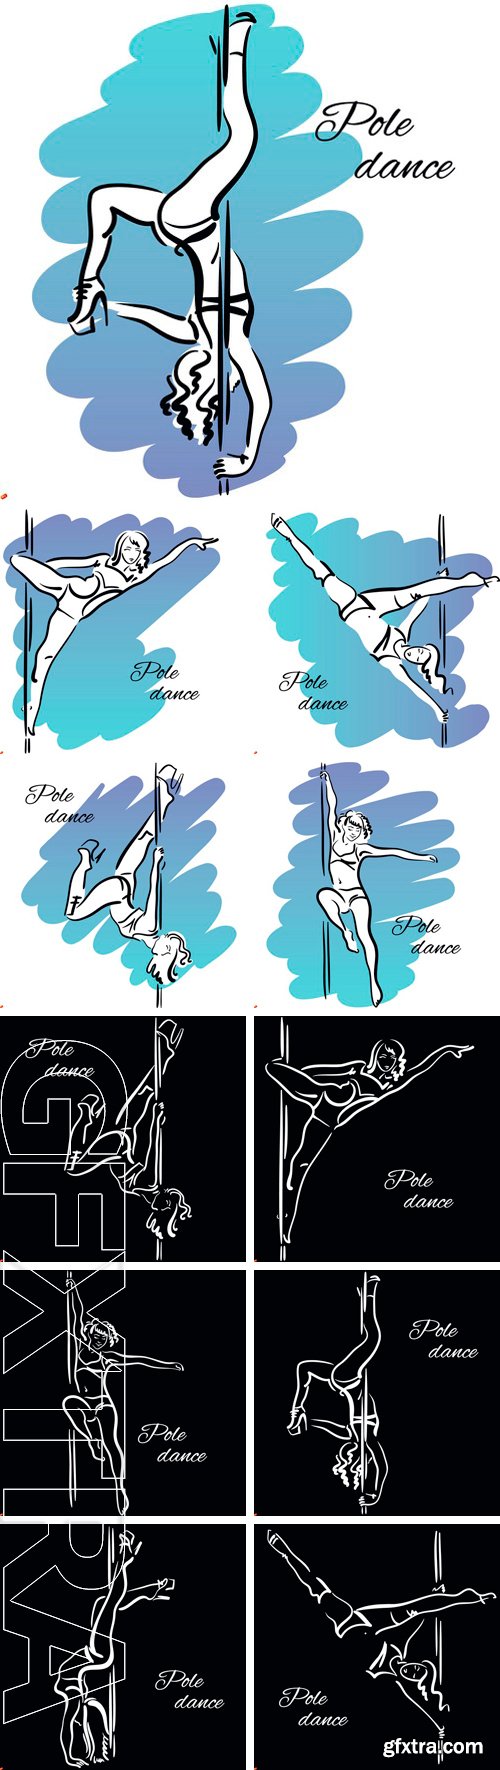 Stock Vectors - Pole dancer with long hair hanging on the pole